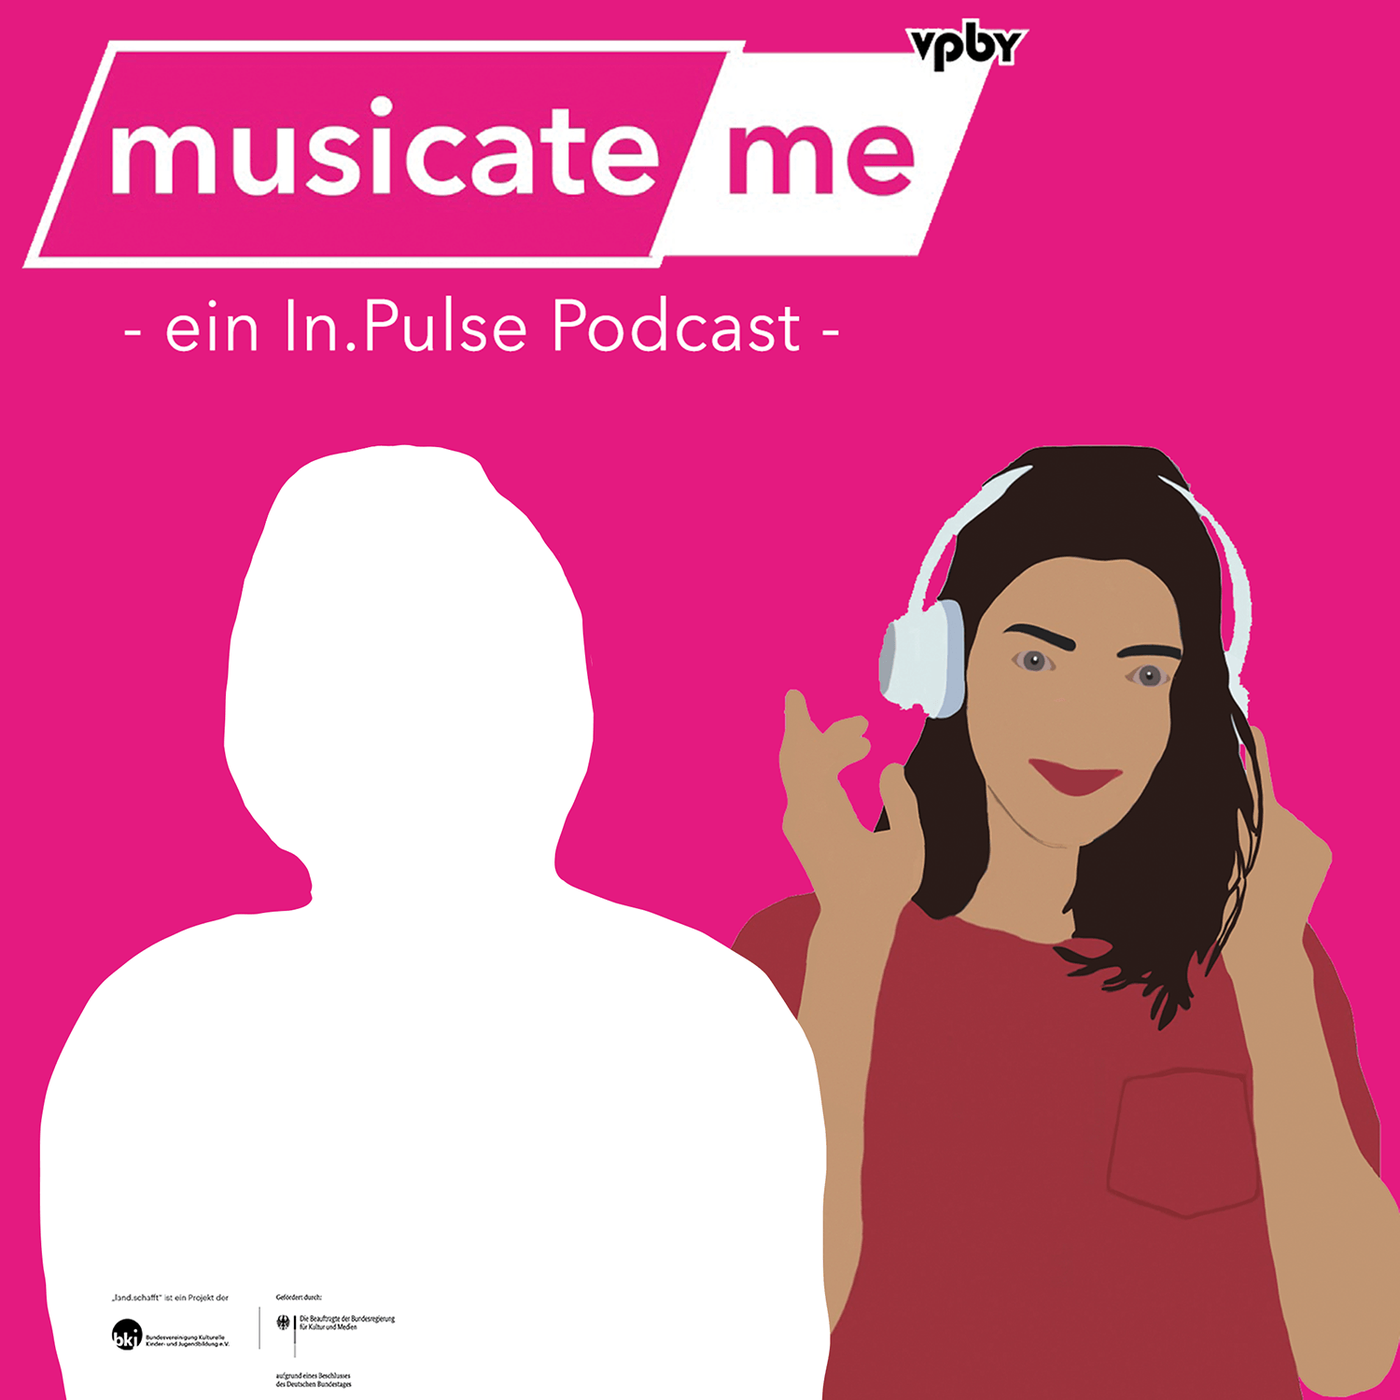 musicate me - ein In.Pulse Podcast